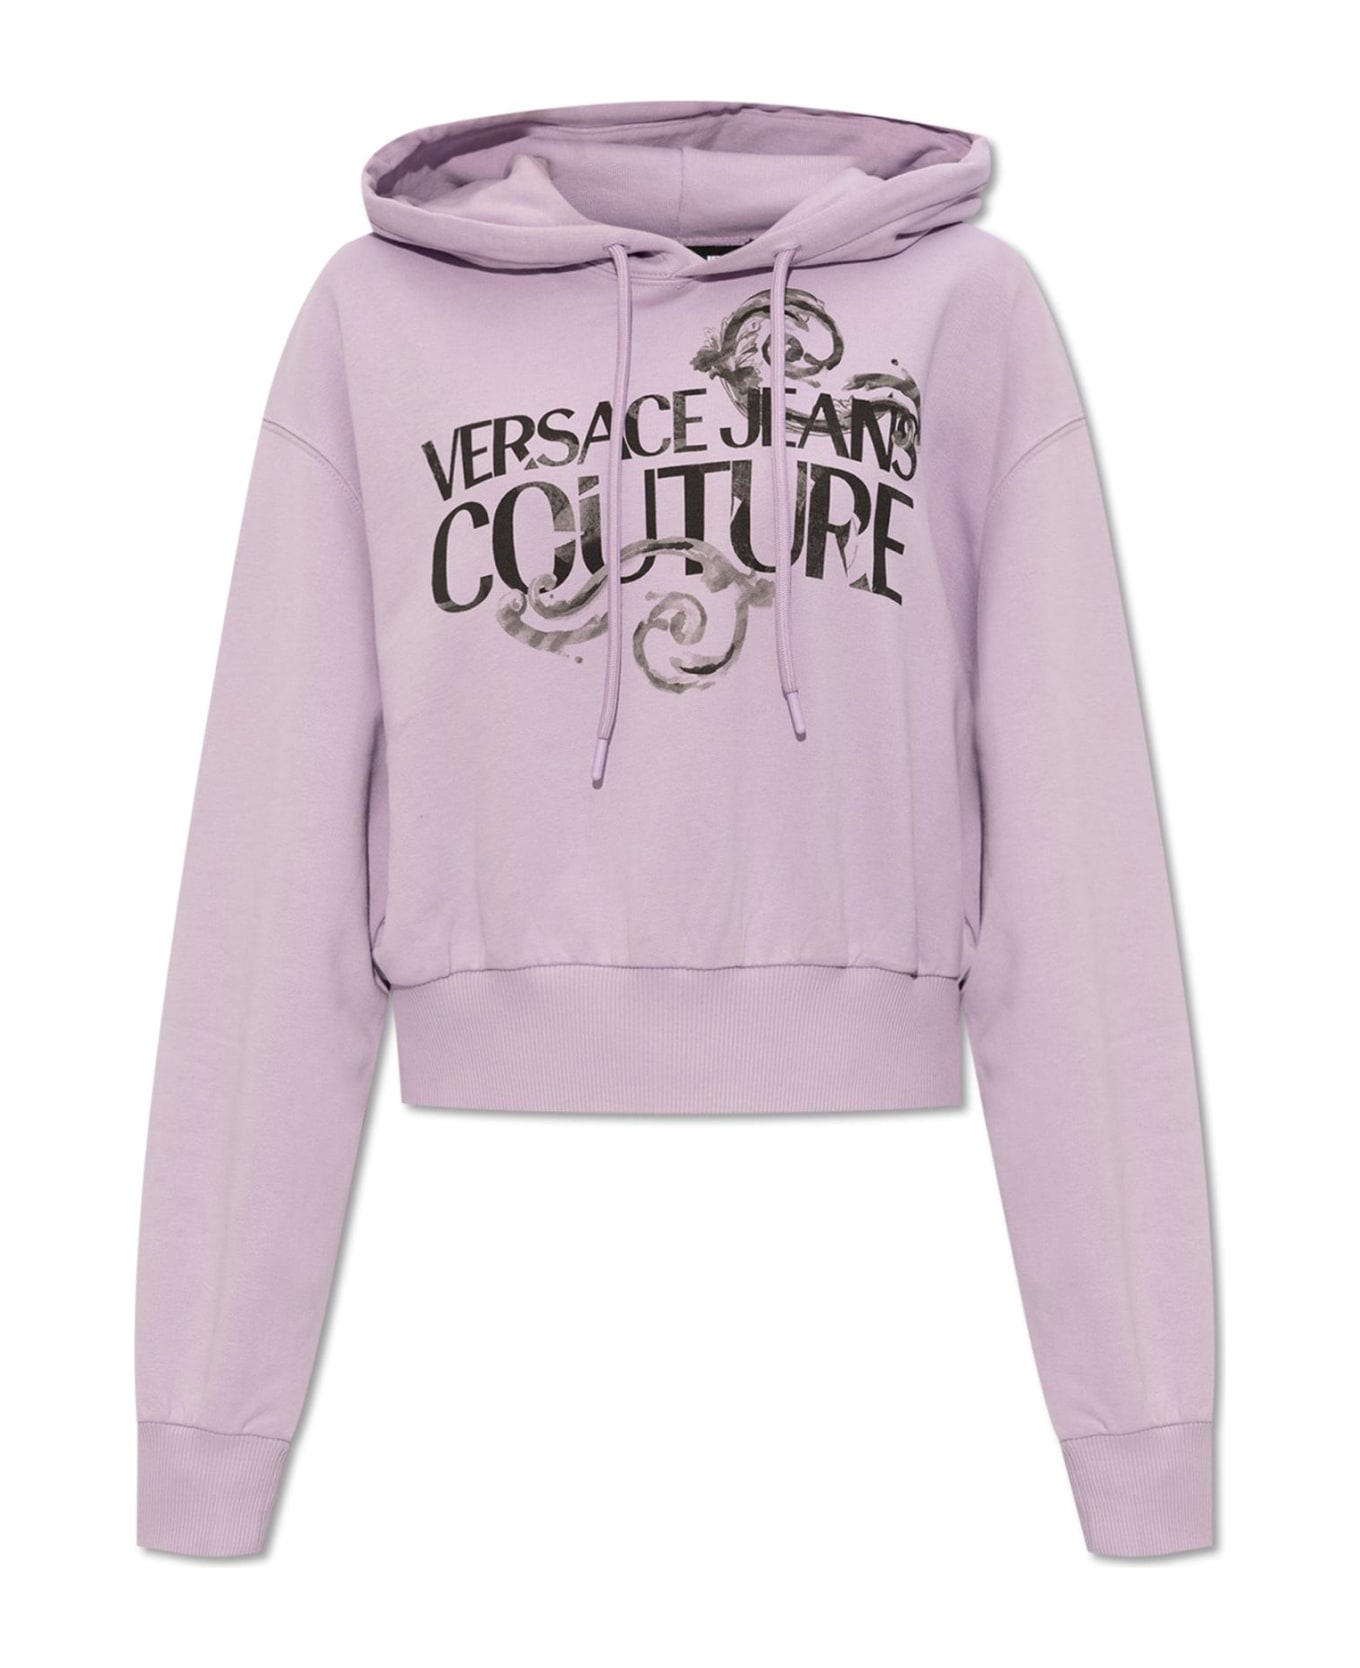 Versace Jeans Couture Cotton Hoodie - Purple フリース